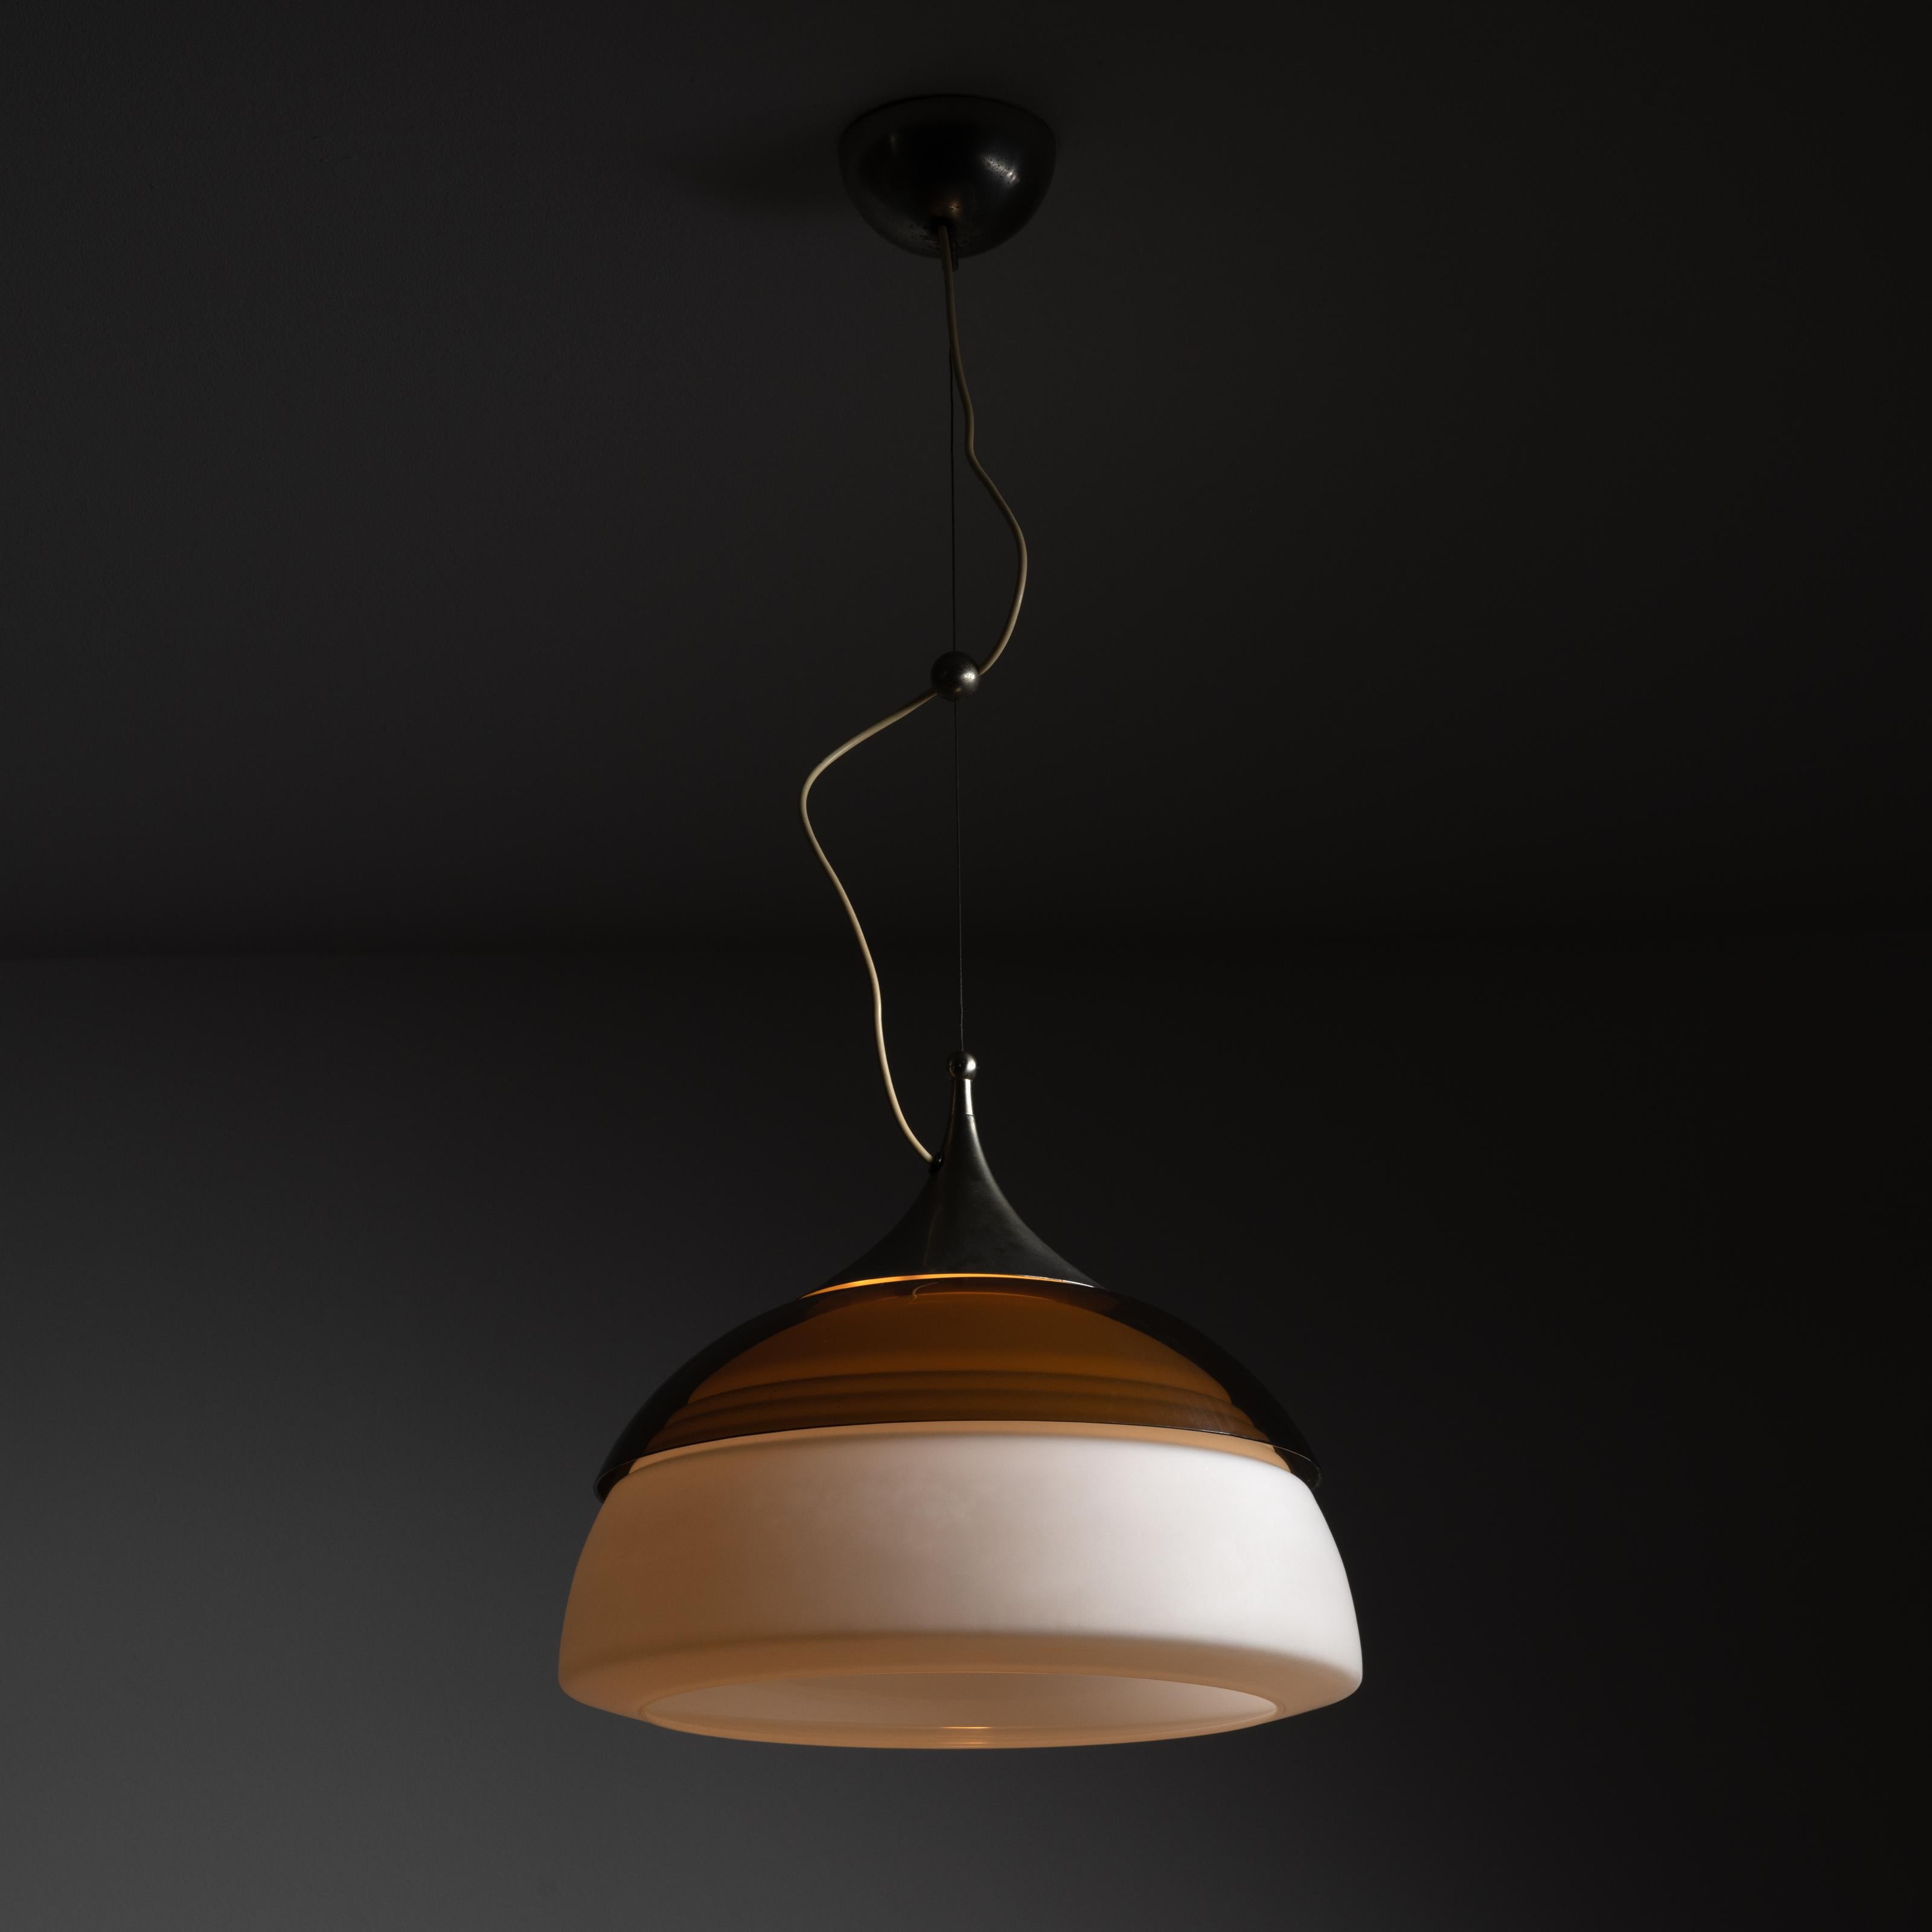 Suspension lights by Stilnovo. Designed and manufactured in Italy, circa the 1960s. A whiskey colored acrylic shade stands out on this gorgeous ceiling light. At the bottom, rests a blown opal diffuser with threaded detailing at the top half. This